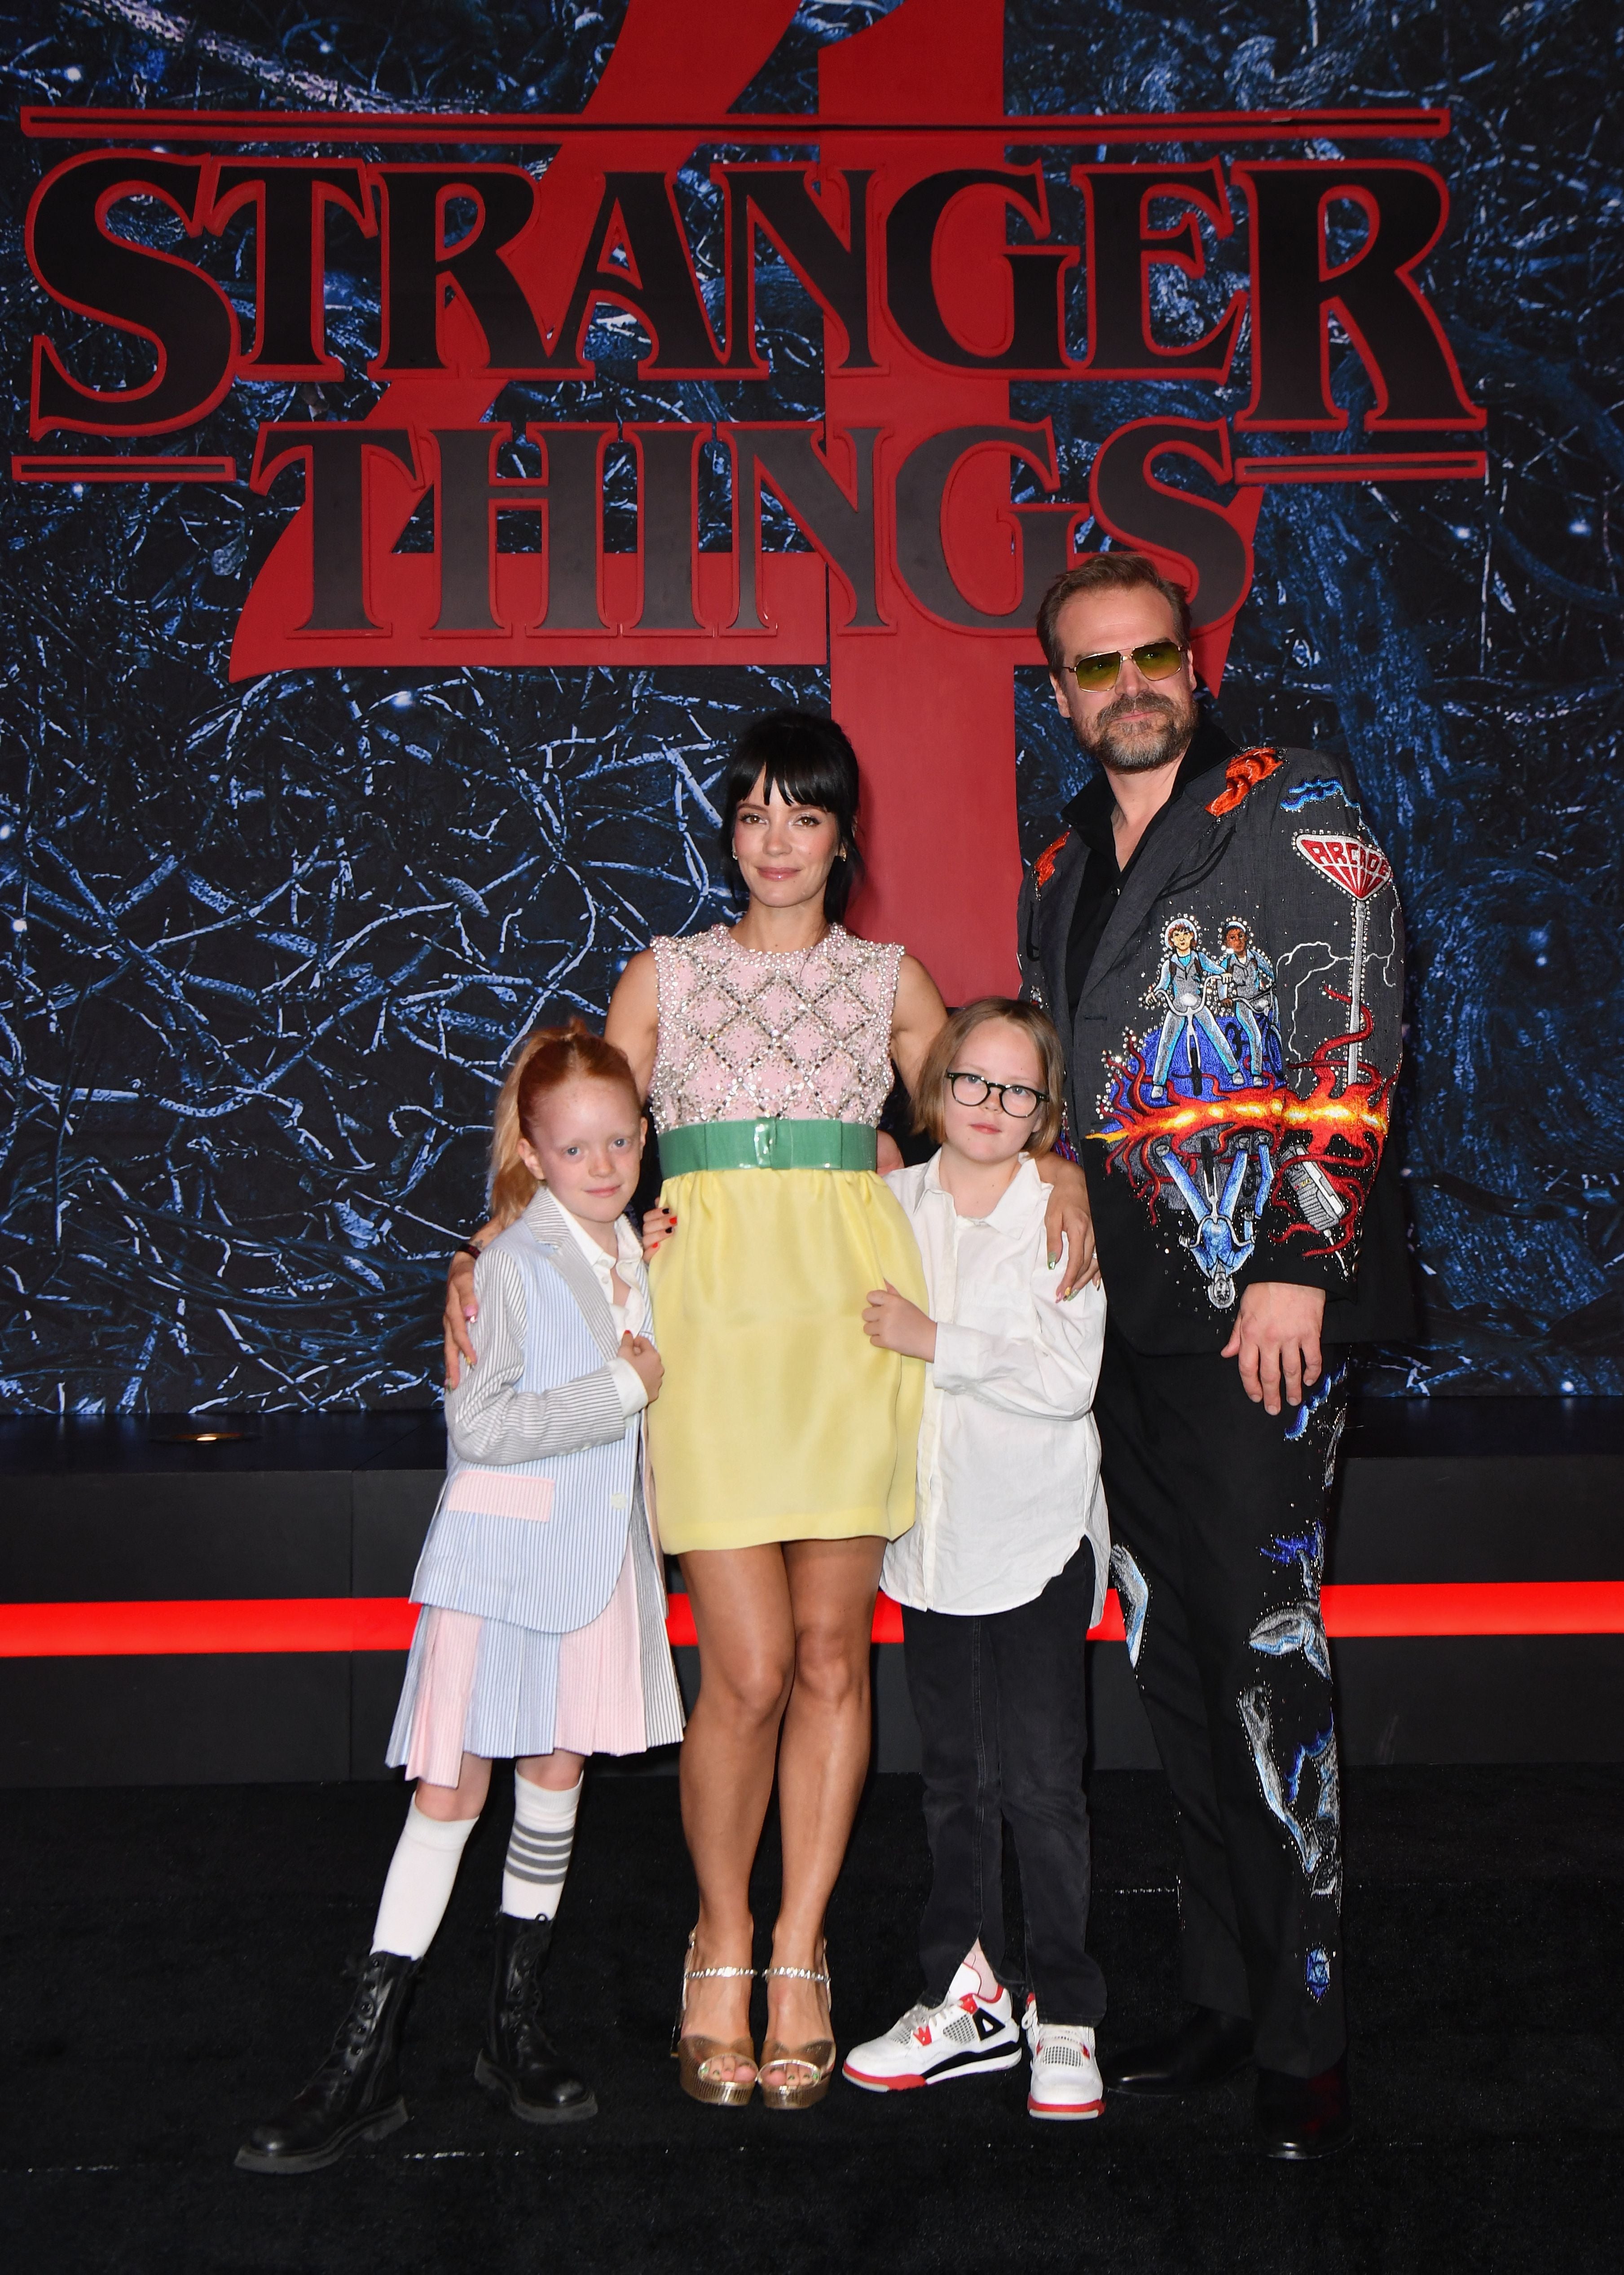 Lily Allen with her husband David Harbour and daughters Marnie Rose Cooper and Ethel Cooper at the ‘Stranger Things’ season four premiere in New York City on 14 May 2022